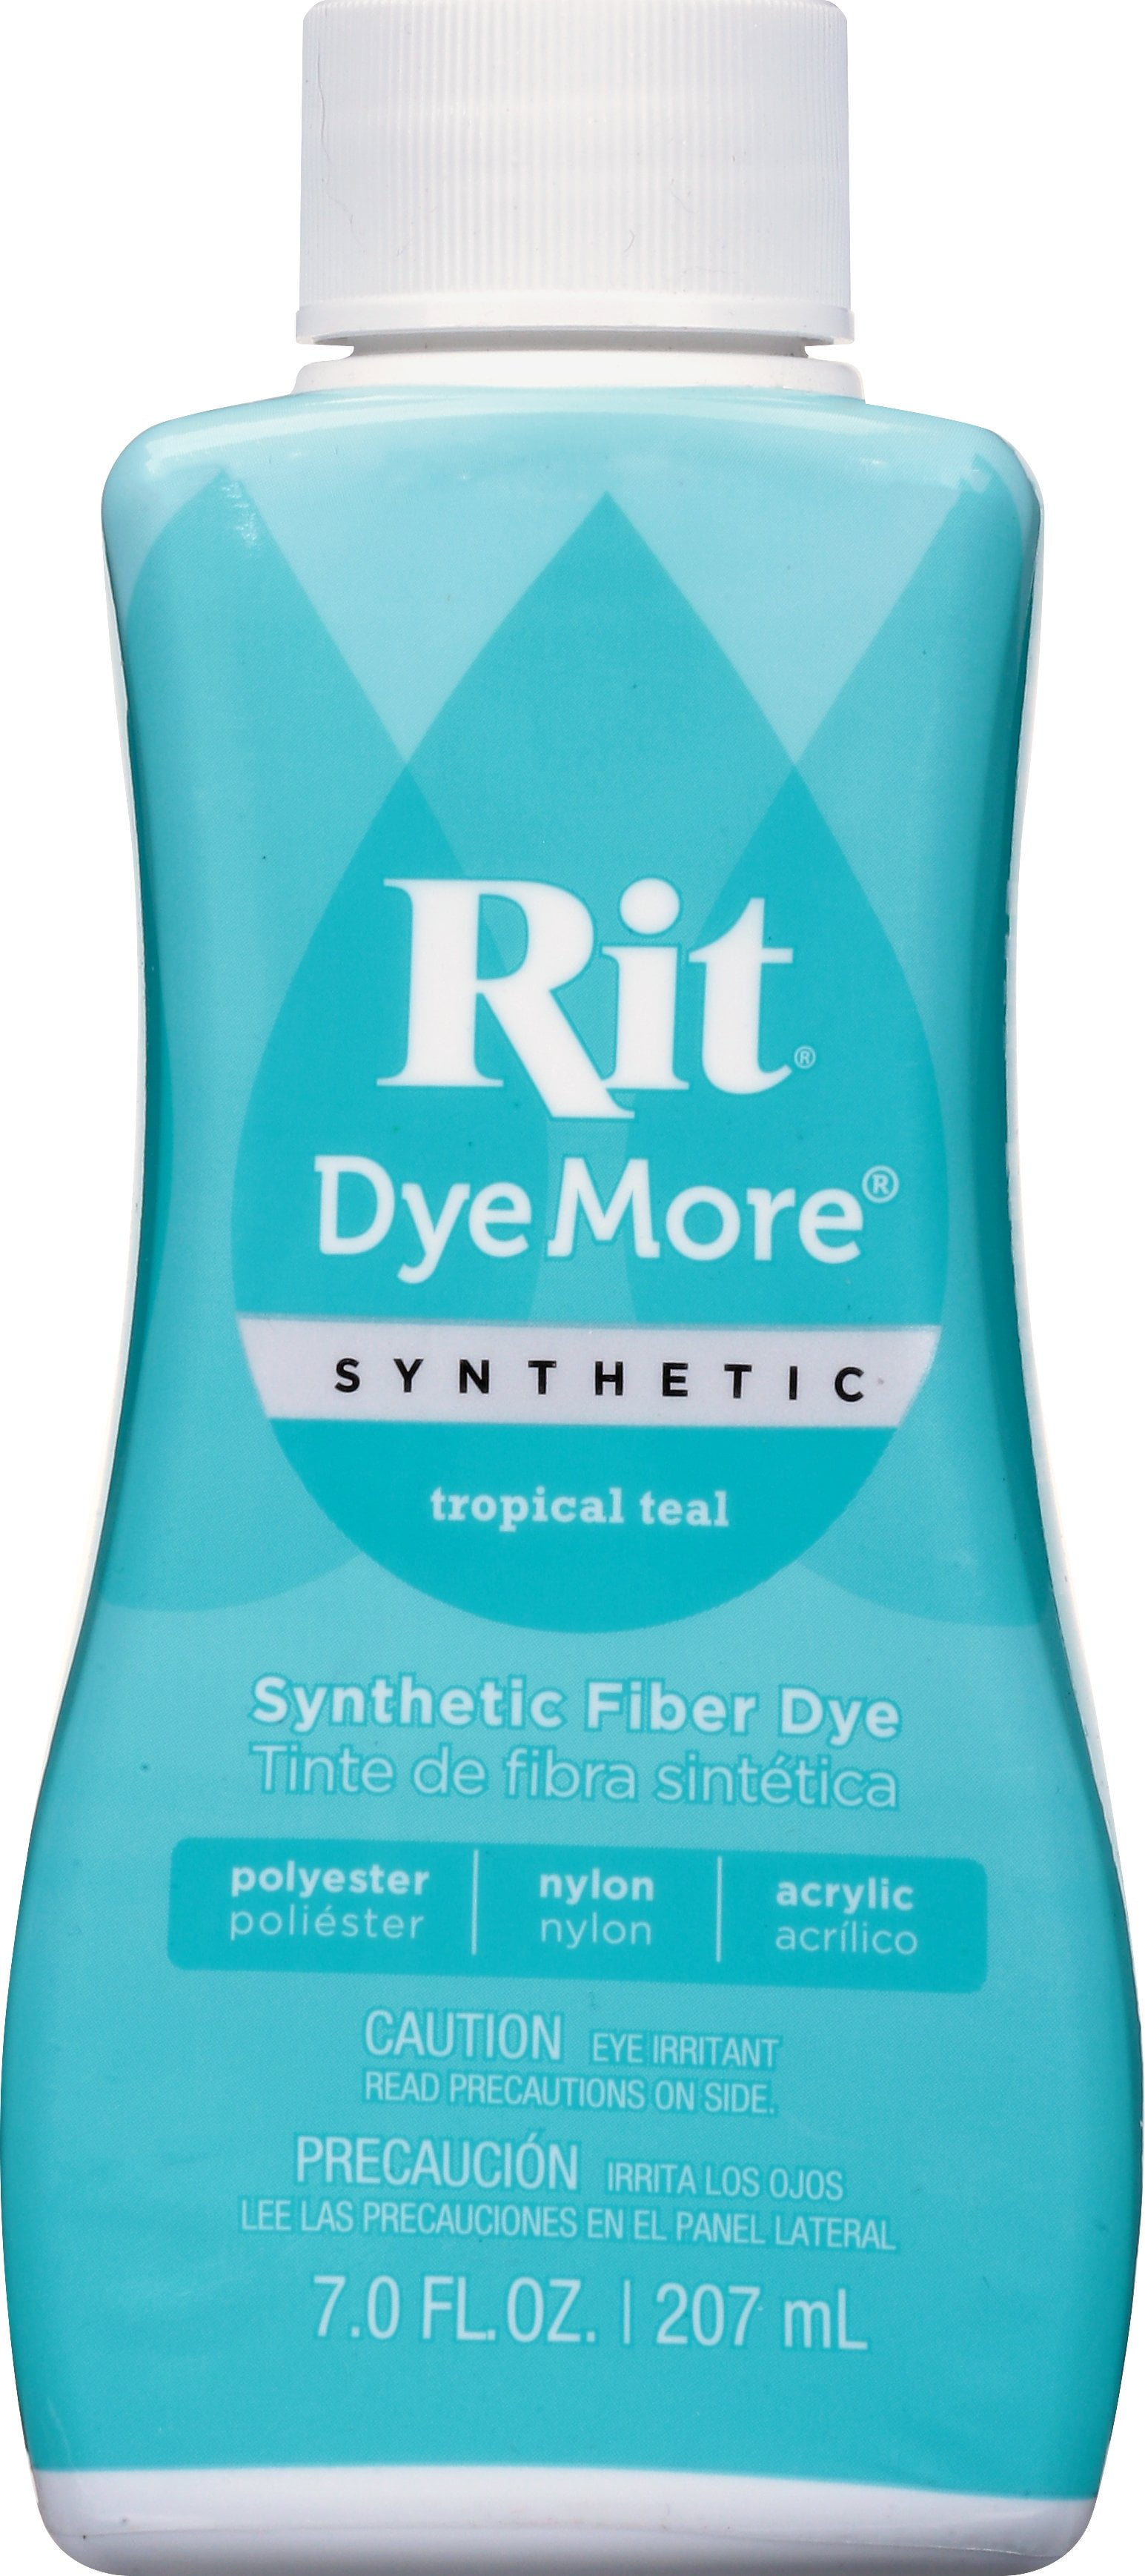 How to Use Rit DyeMore for Synthetic Fibers